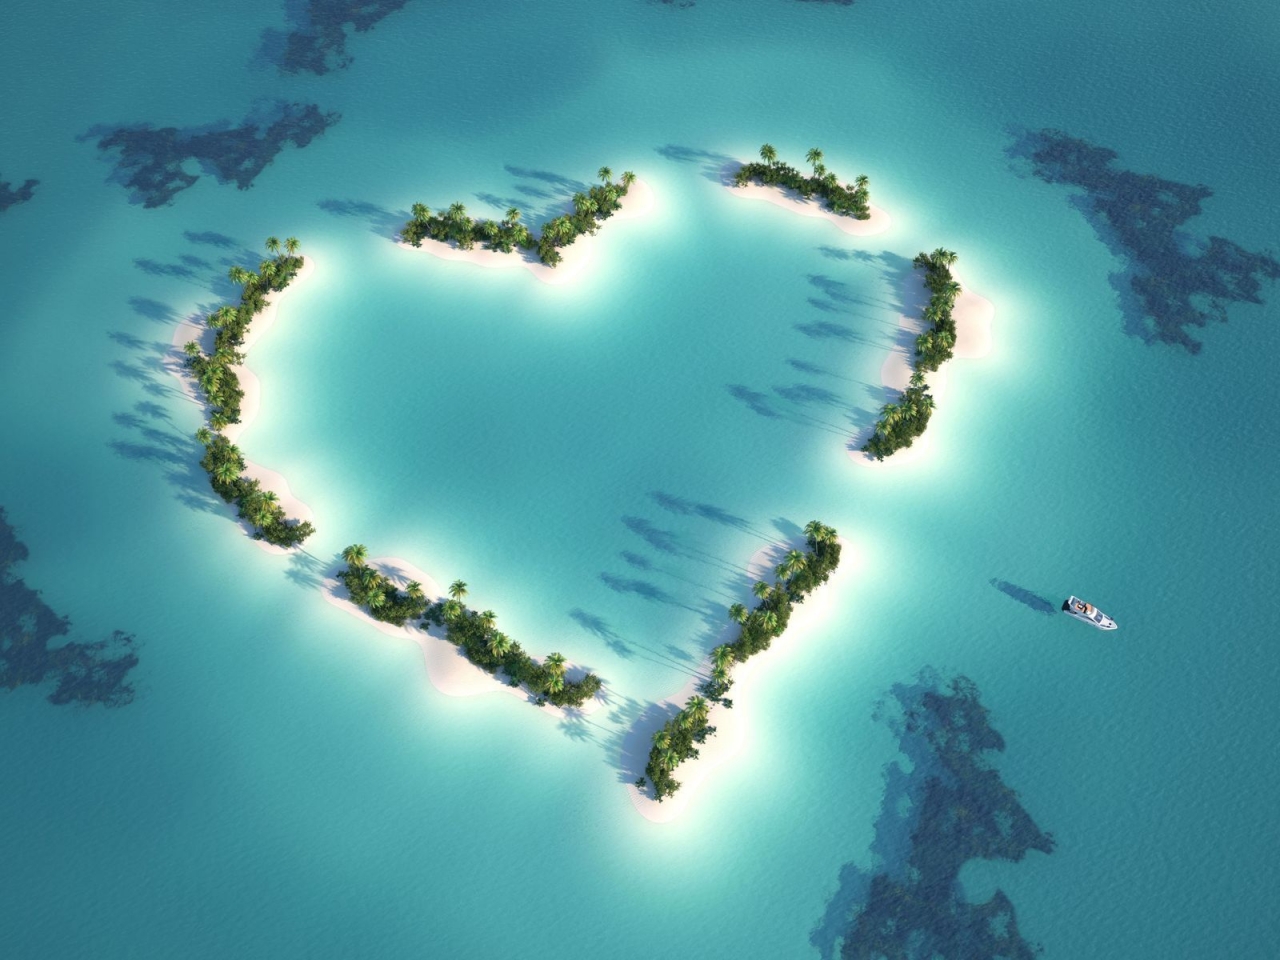 The Love Island for 1280 x 960 resolution